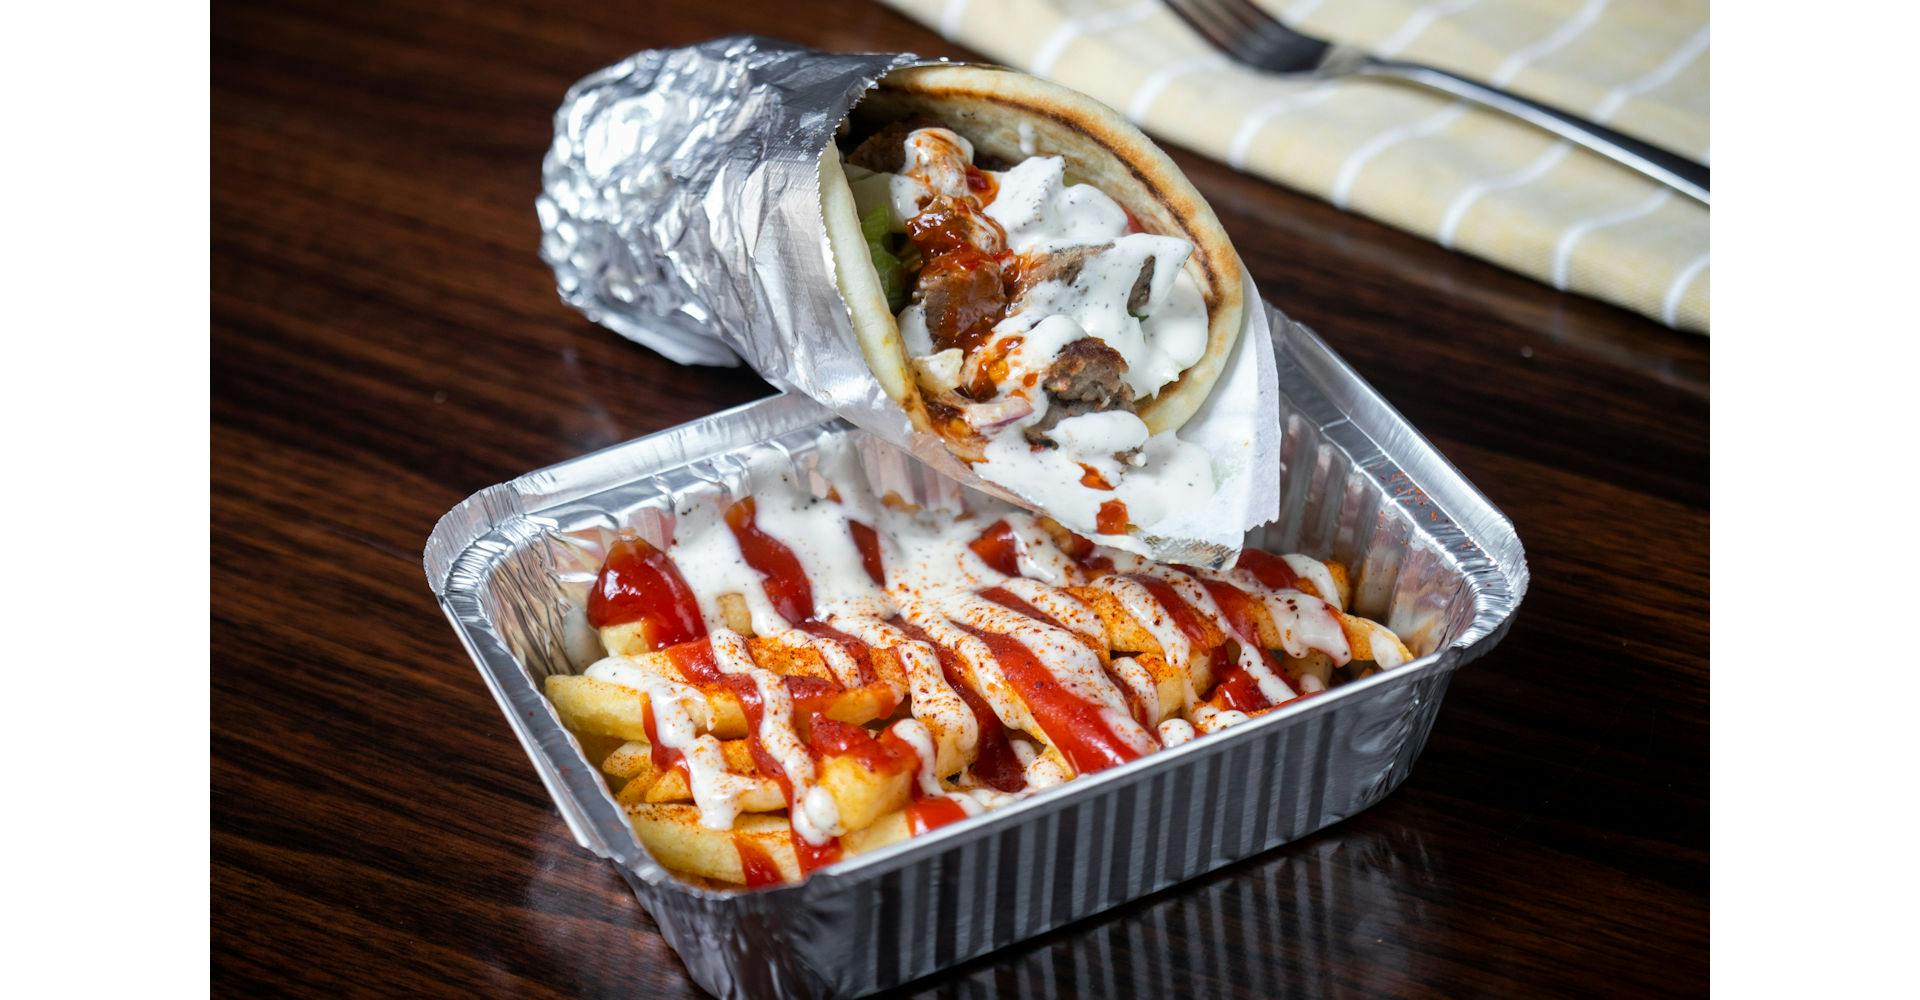 Gyro Wrap Comes With Fries from Austin's Habibi - W 5th St in Austin, TX